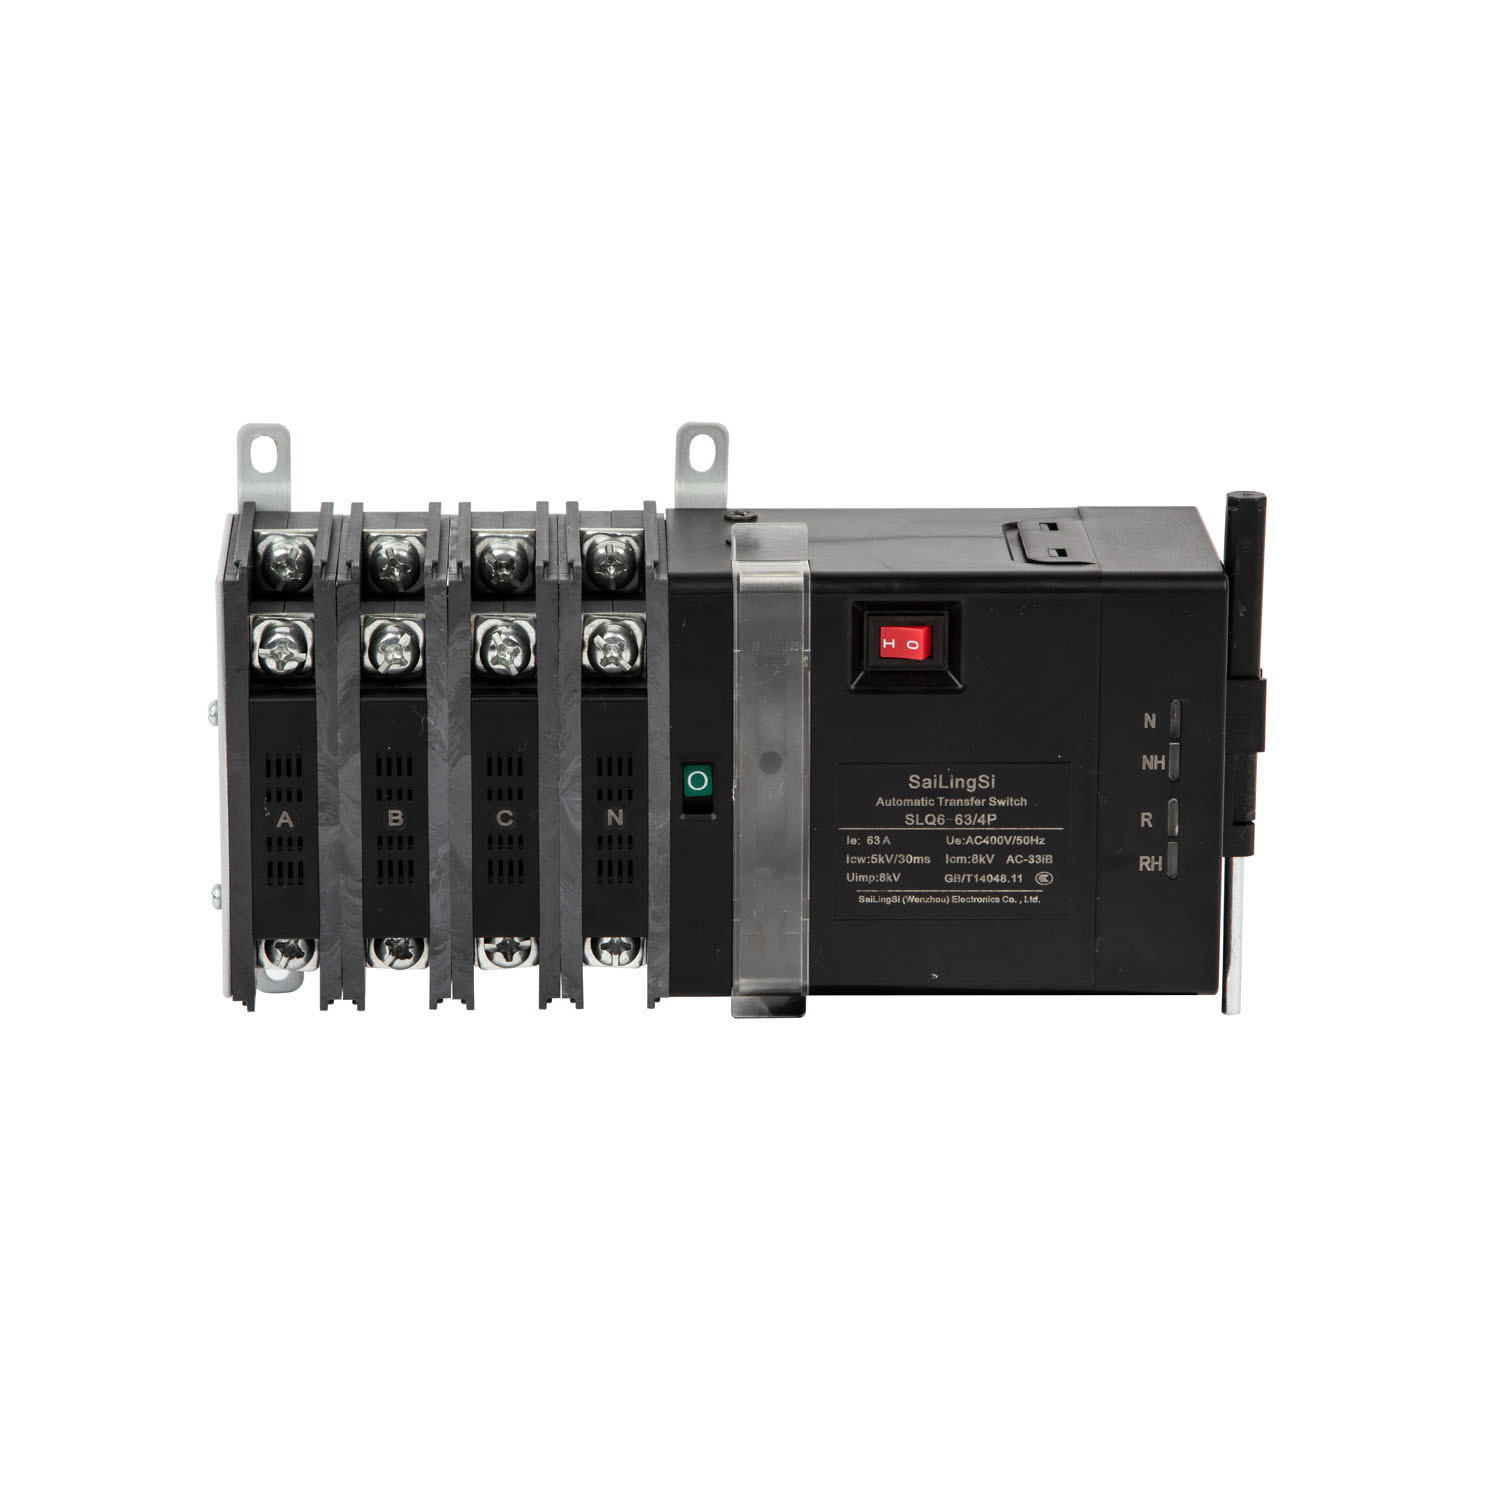 Solar Power to City Power ATS 63A 2p Automatic Transfer Switch ATS with Fire Control